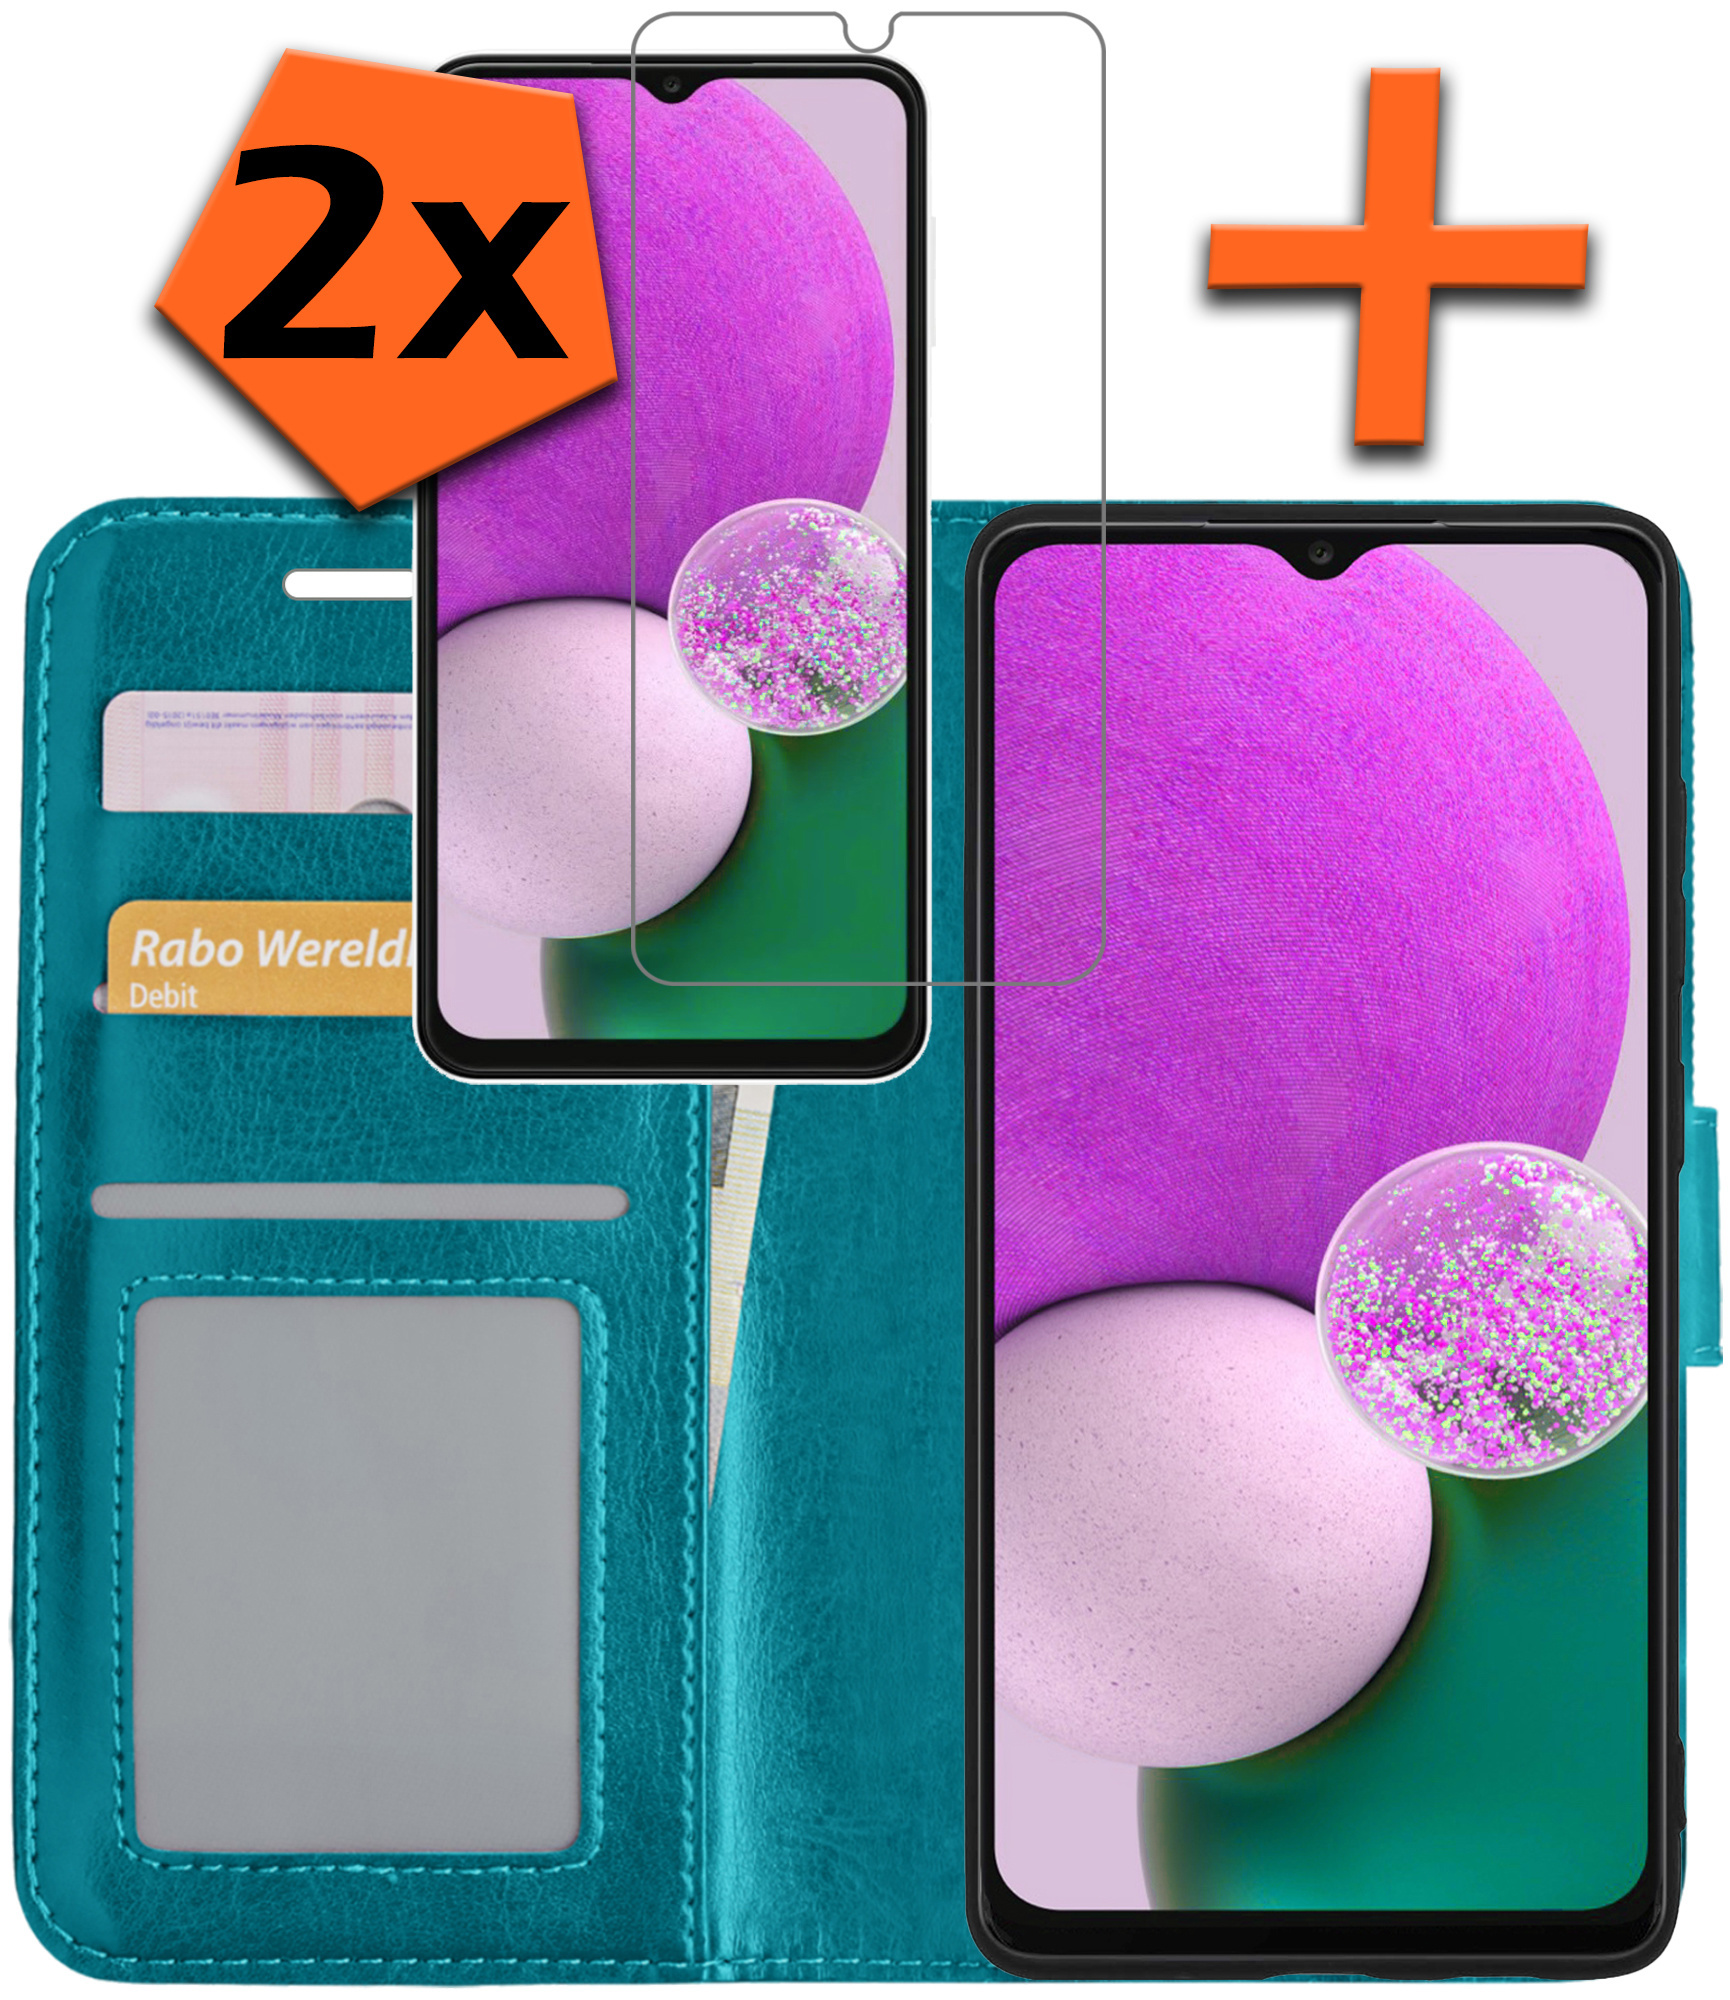 Samsung Galaxy A13 5G Hoesje Bookcase Met 2x Screenprotector - Samsung Galaxy A13 5G Screenprotector 2x - Samsung Galaxy A13 5G Book Case Met 2x Screenprotector Turquoise